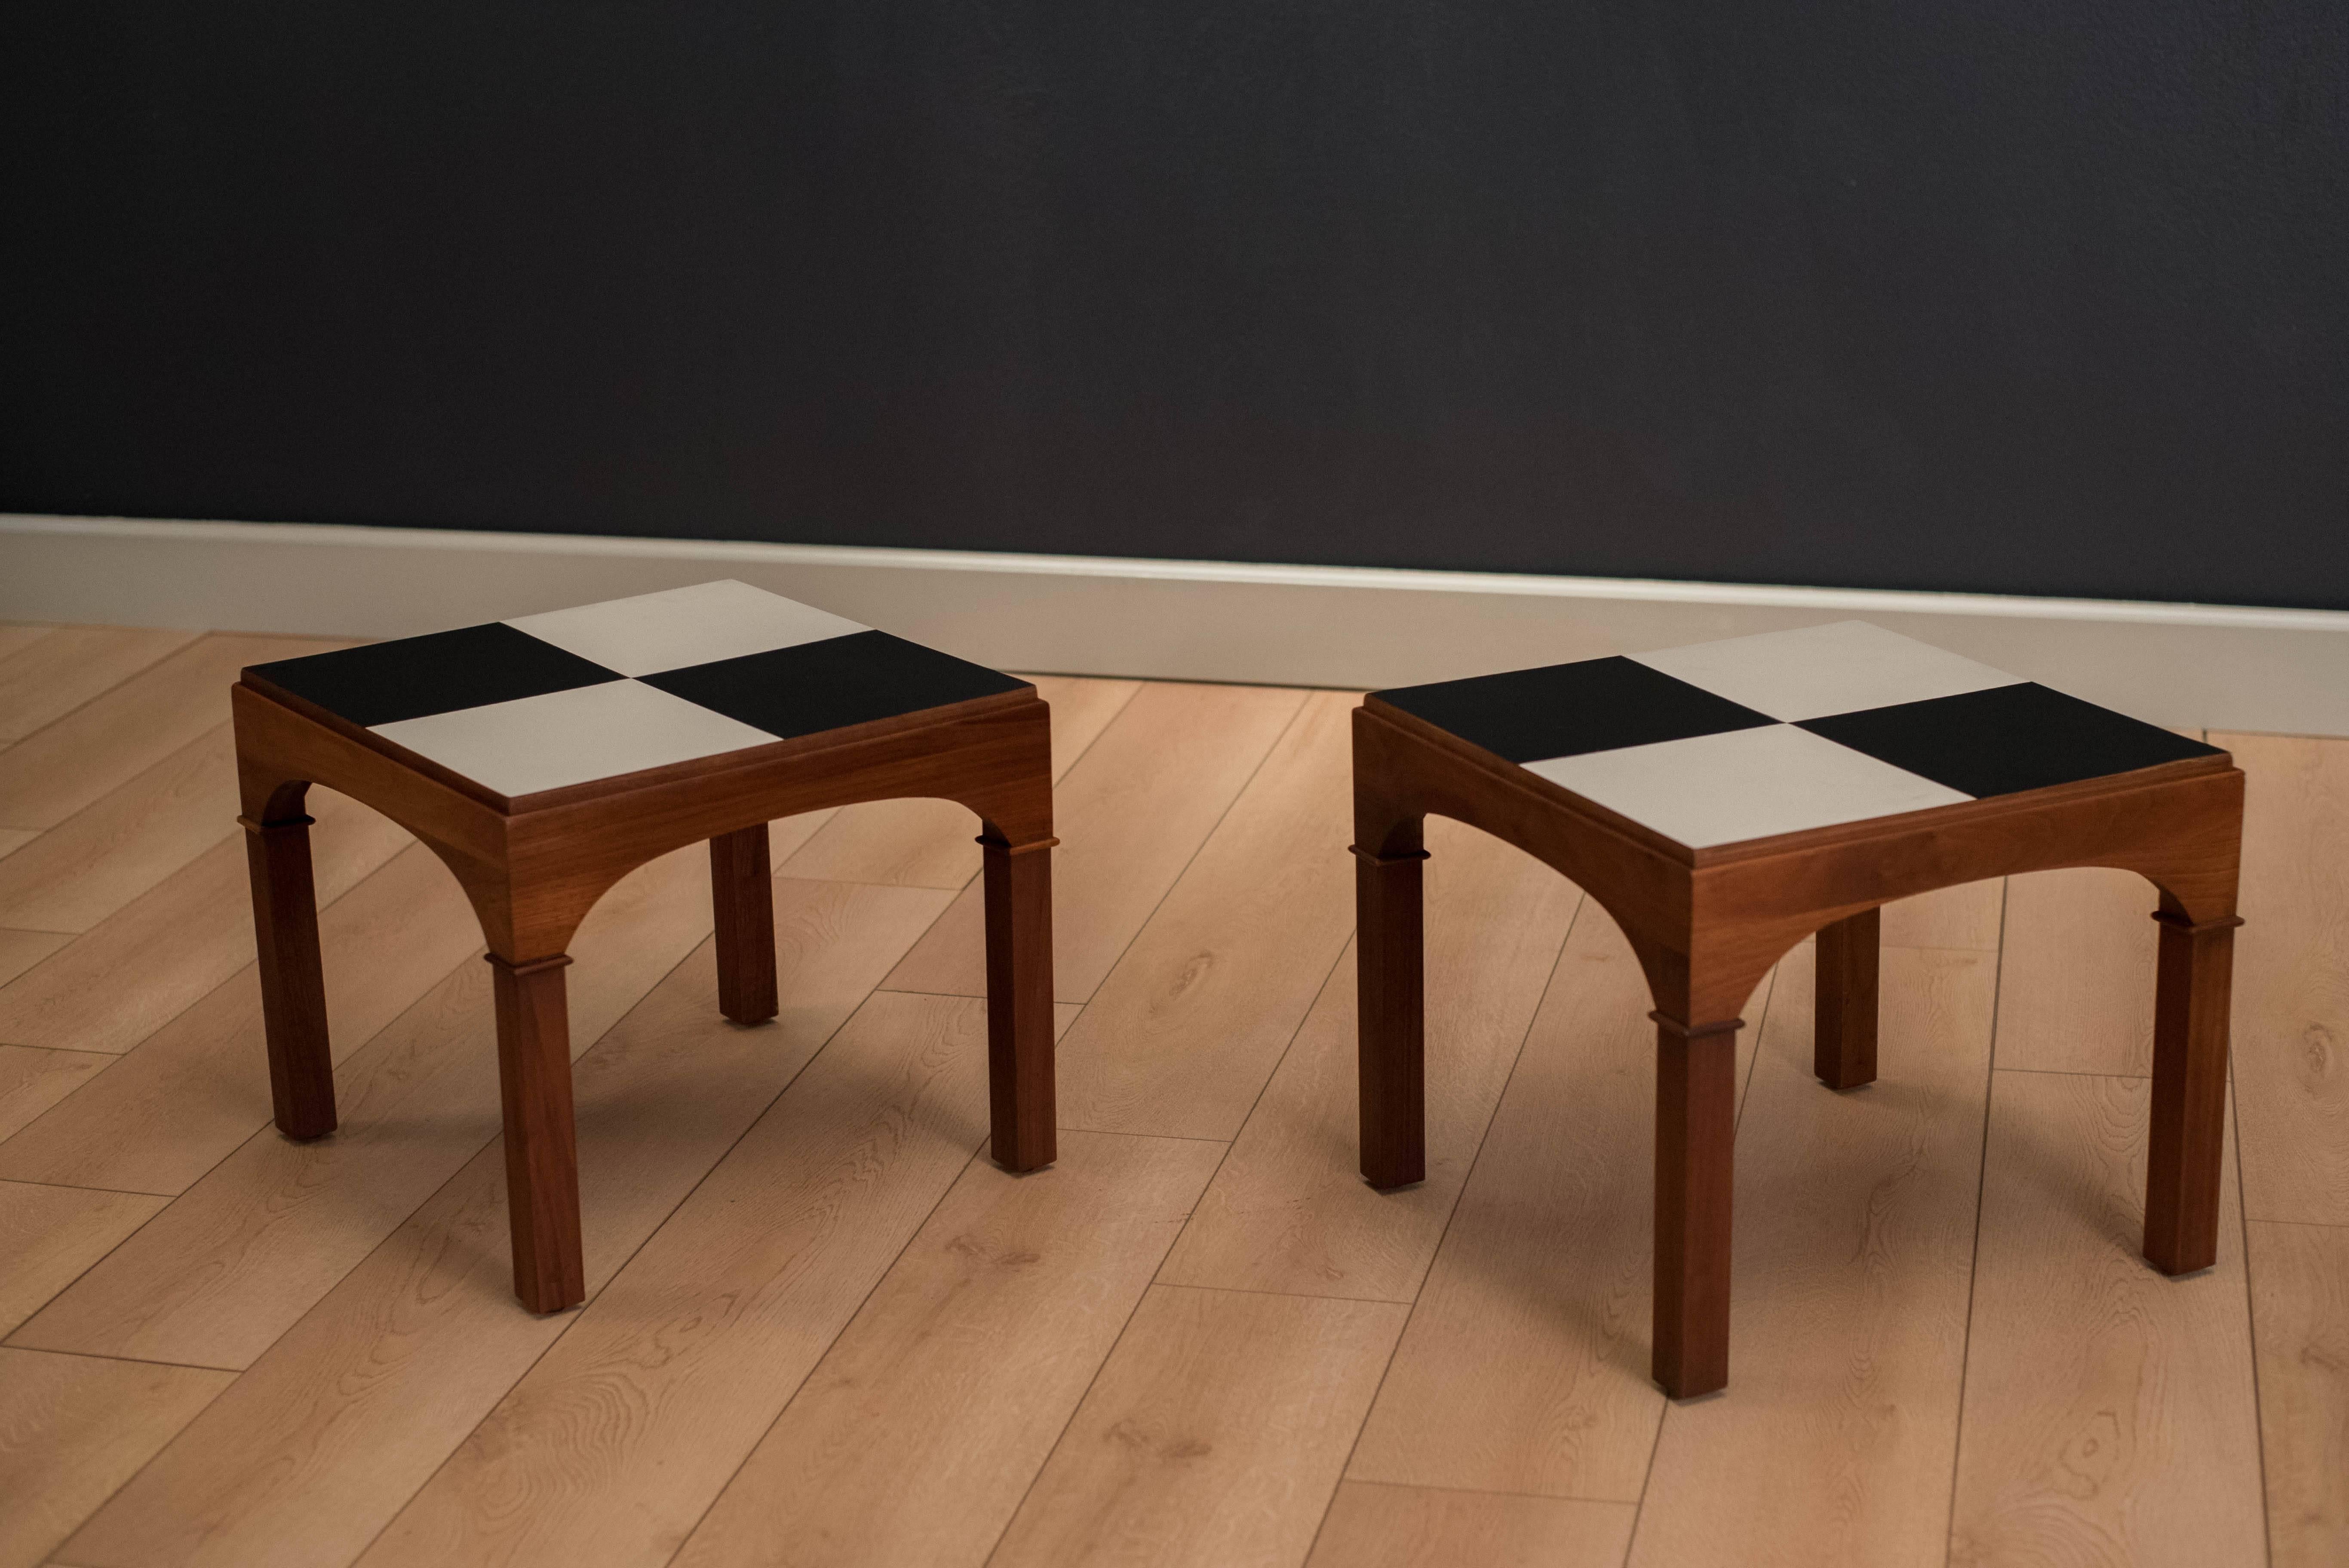 Mid-Century Brown Saltman end tables designed by John Keal, circa 1950s. This rare set features a checkered black and white formica top on a solid walnut base. Price is for the pair.